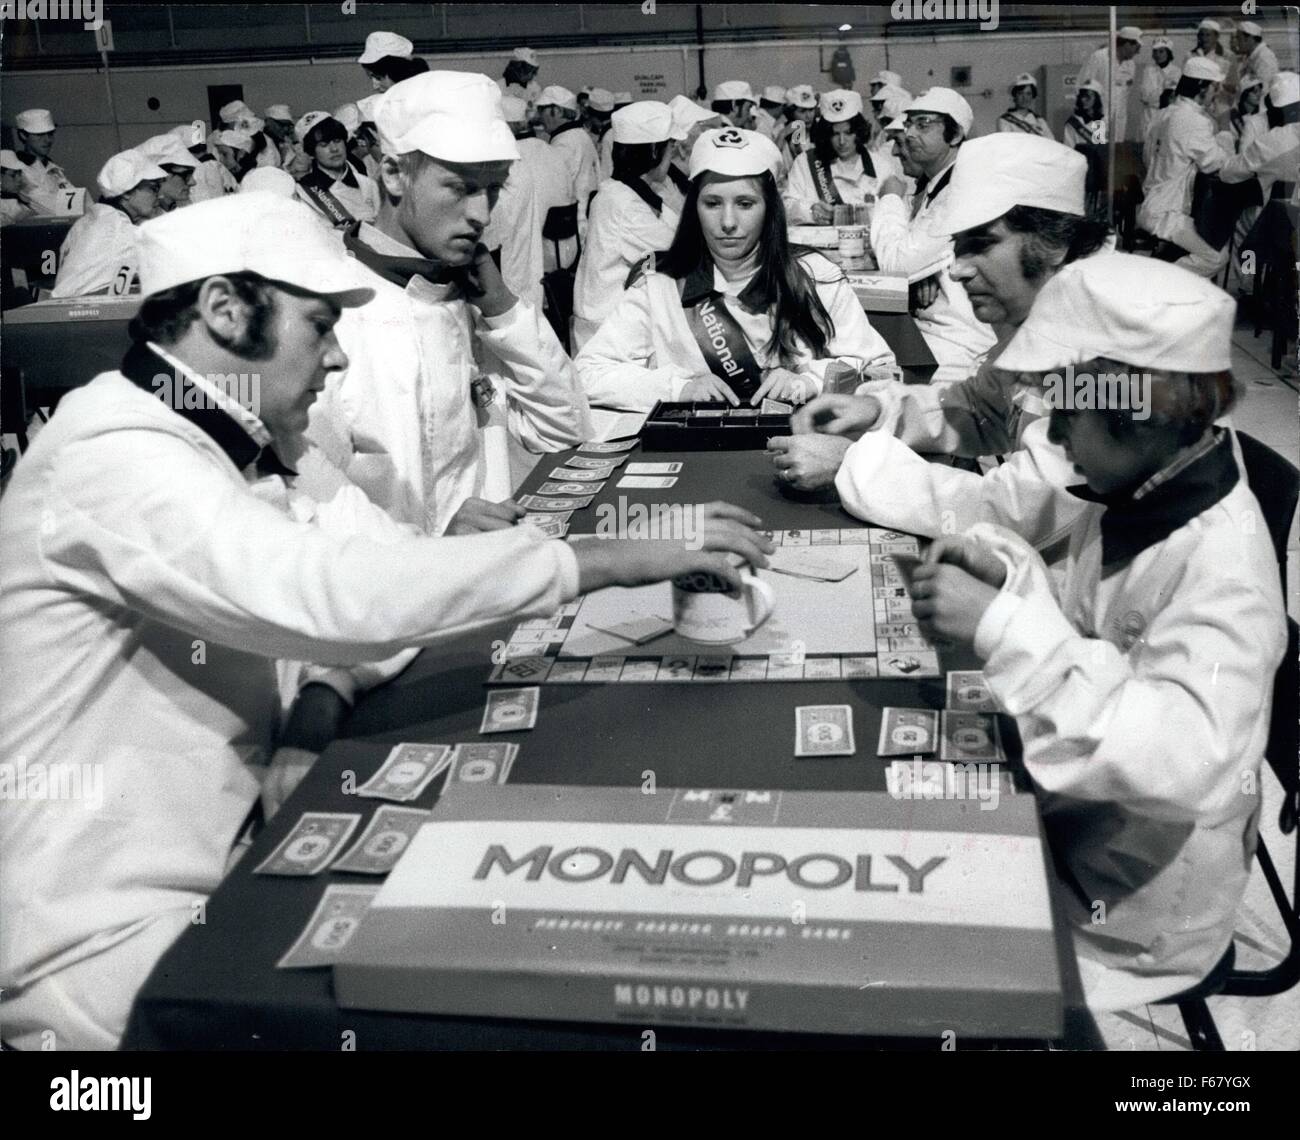 1978 - British monopoly championships staged on a nuclear reactor file at Thor burn near Bristol.: The British monopoly championships are being staged on a nuclear reactopile at the Oldury on Savern power station at Thornbury near Bristol. Nearly 150 men, women and children through out Britain are taking part. Each competitor were wearing protective clothing while on the pile, and after leaving the reactor they all go through the decontamination wash. The winner of the British Crown will represent Britain at the world monopoly championships due to be staged at SEM casino centre in Monte Carlo Stock Photo